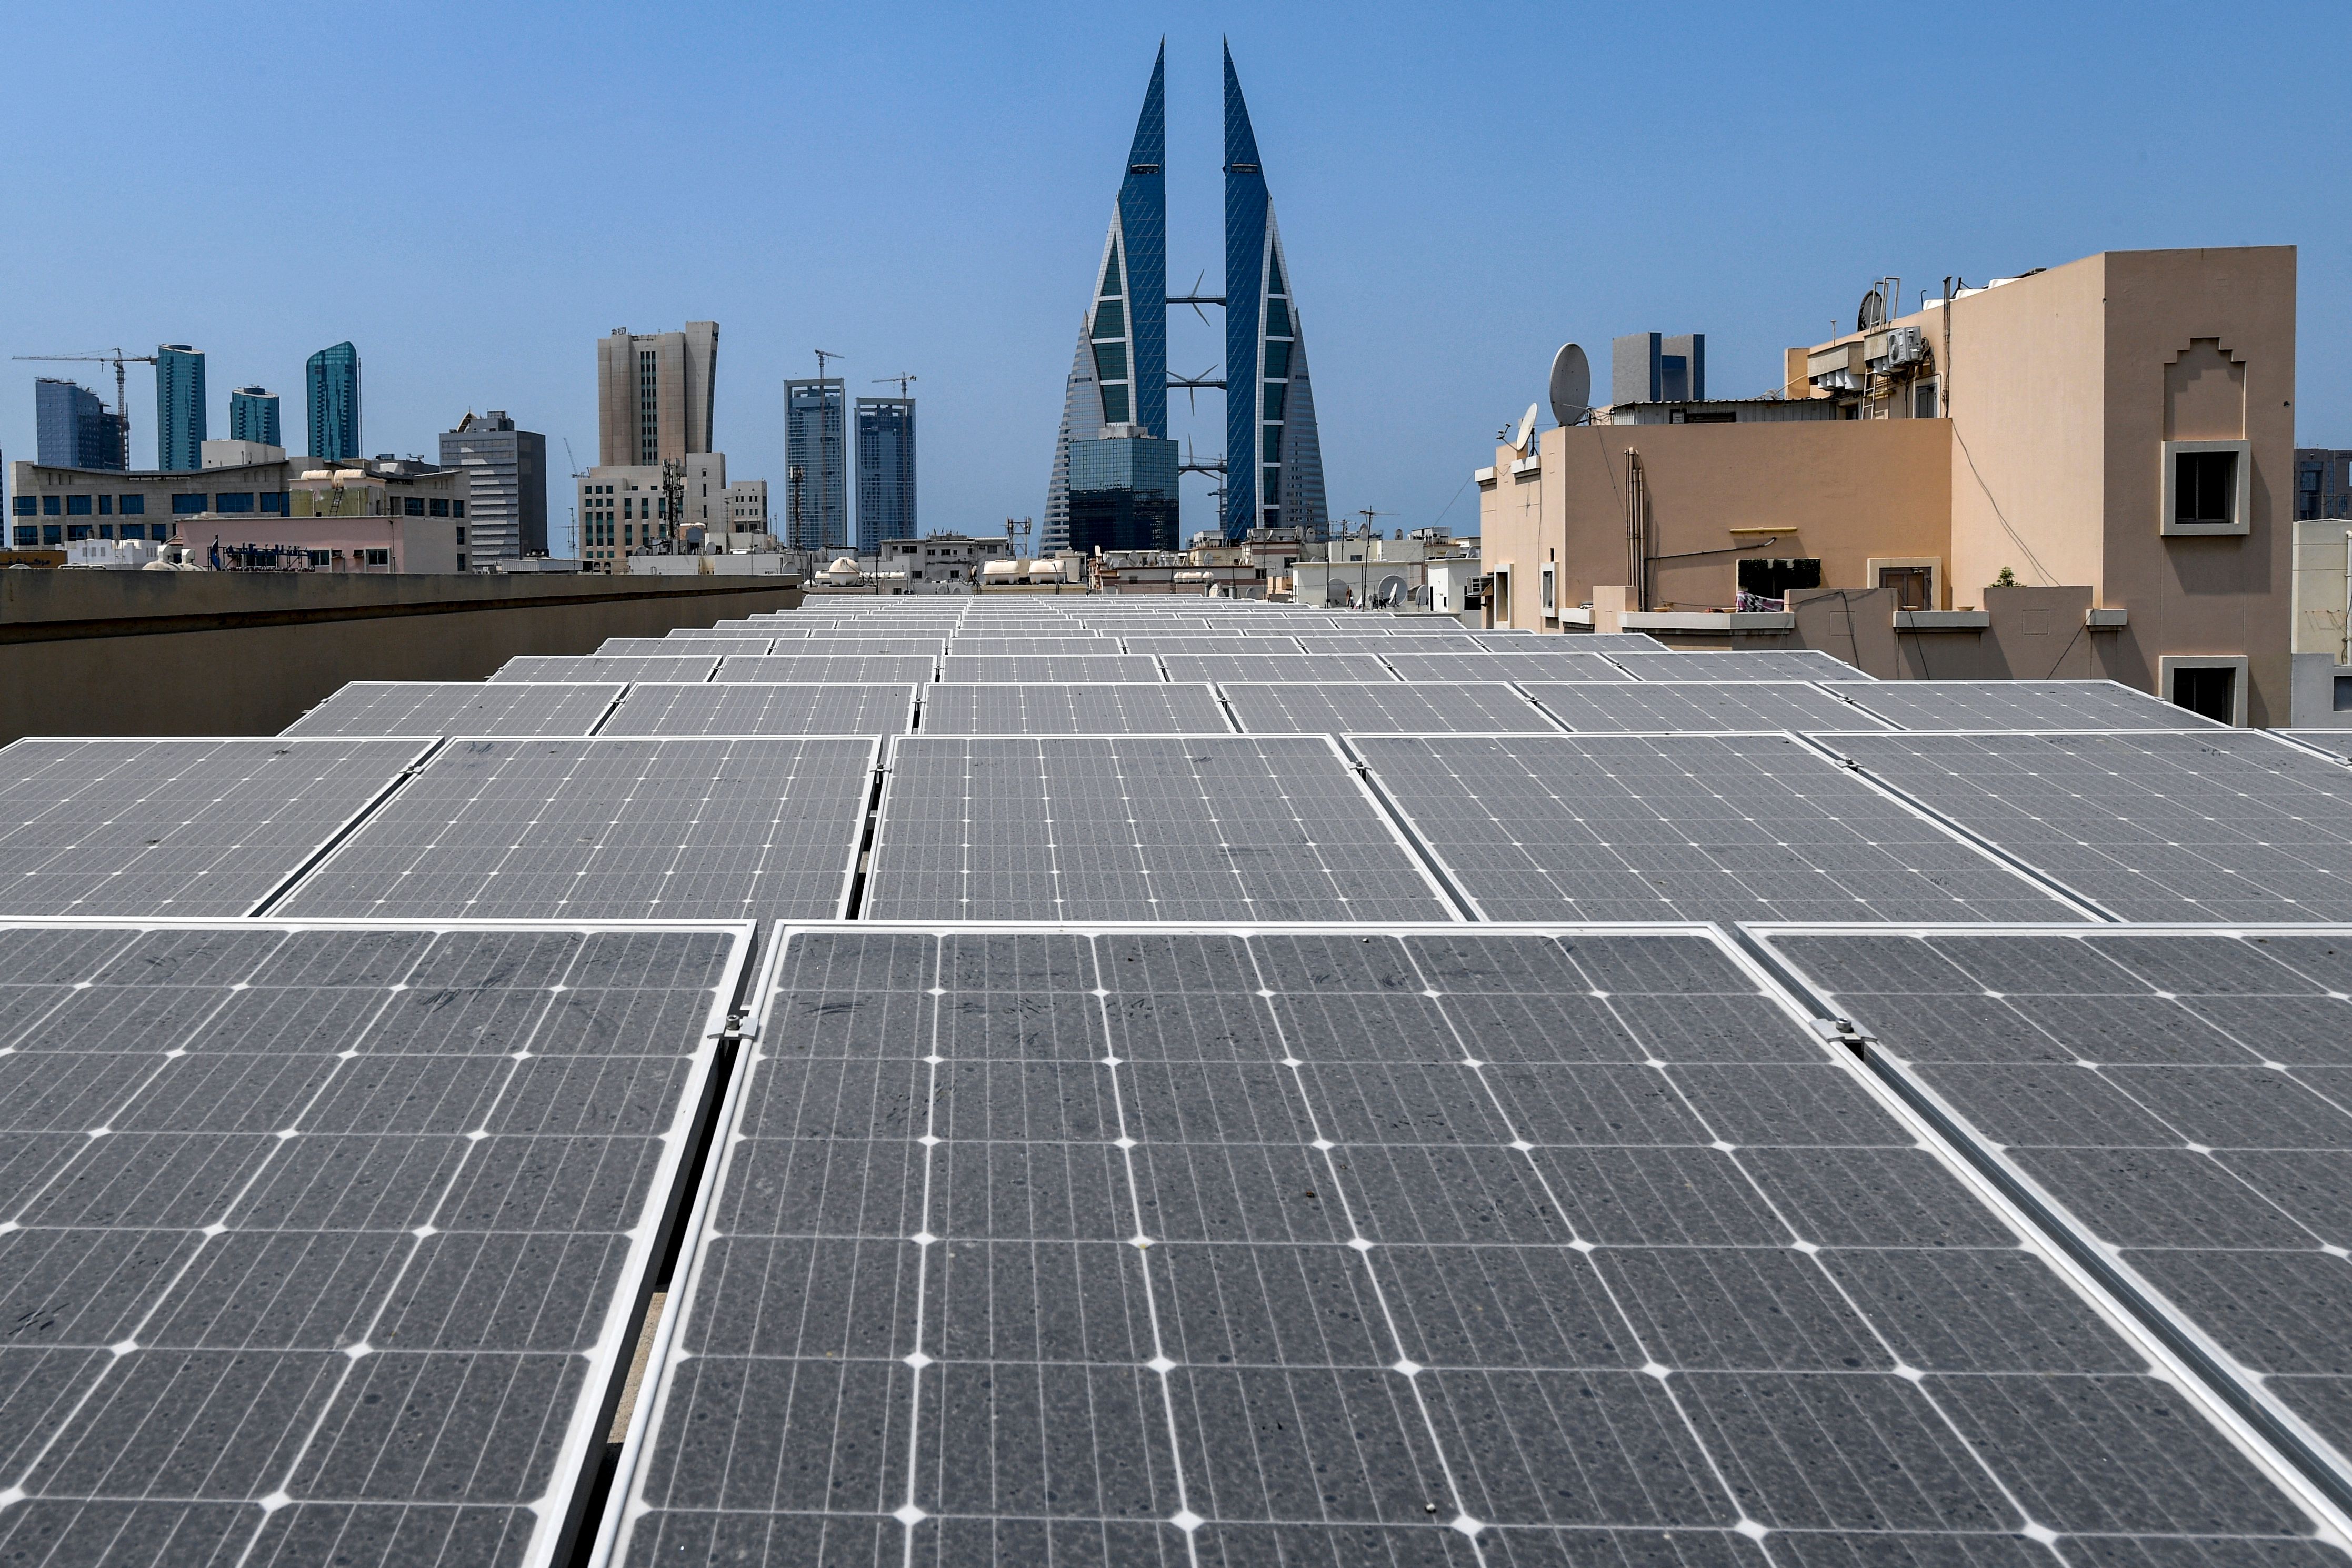 Solar panels are installed on the roof of a school in Bahrain’s capital Manama on Aug. 25, 2022. Photo by MAZEN MAHDI/AFP via Getty Images.